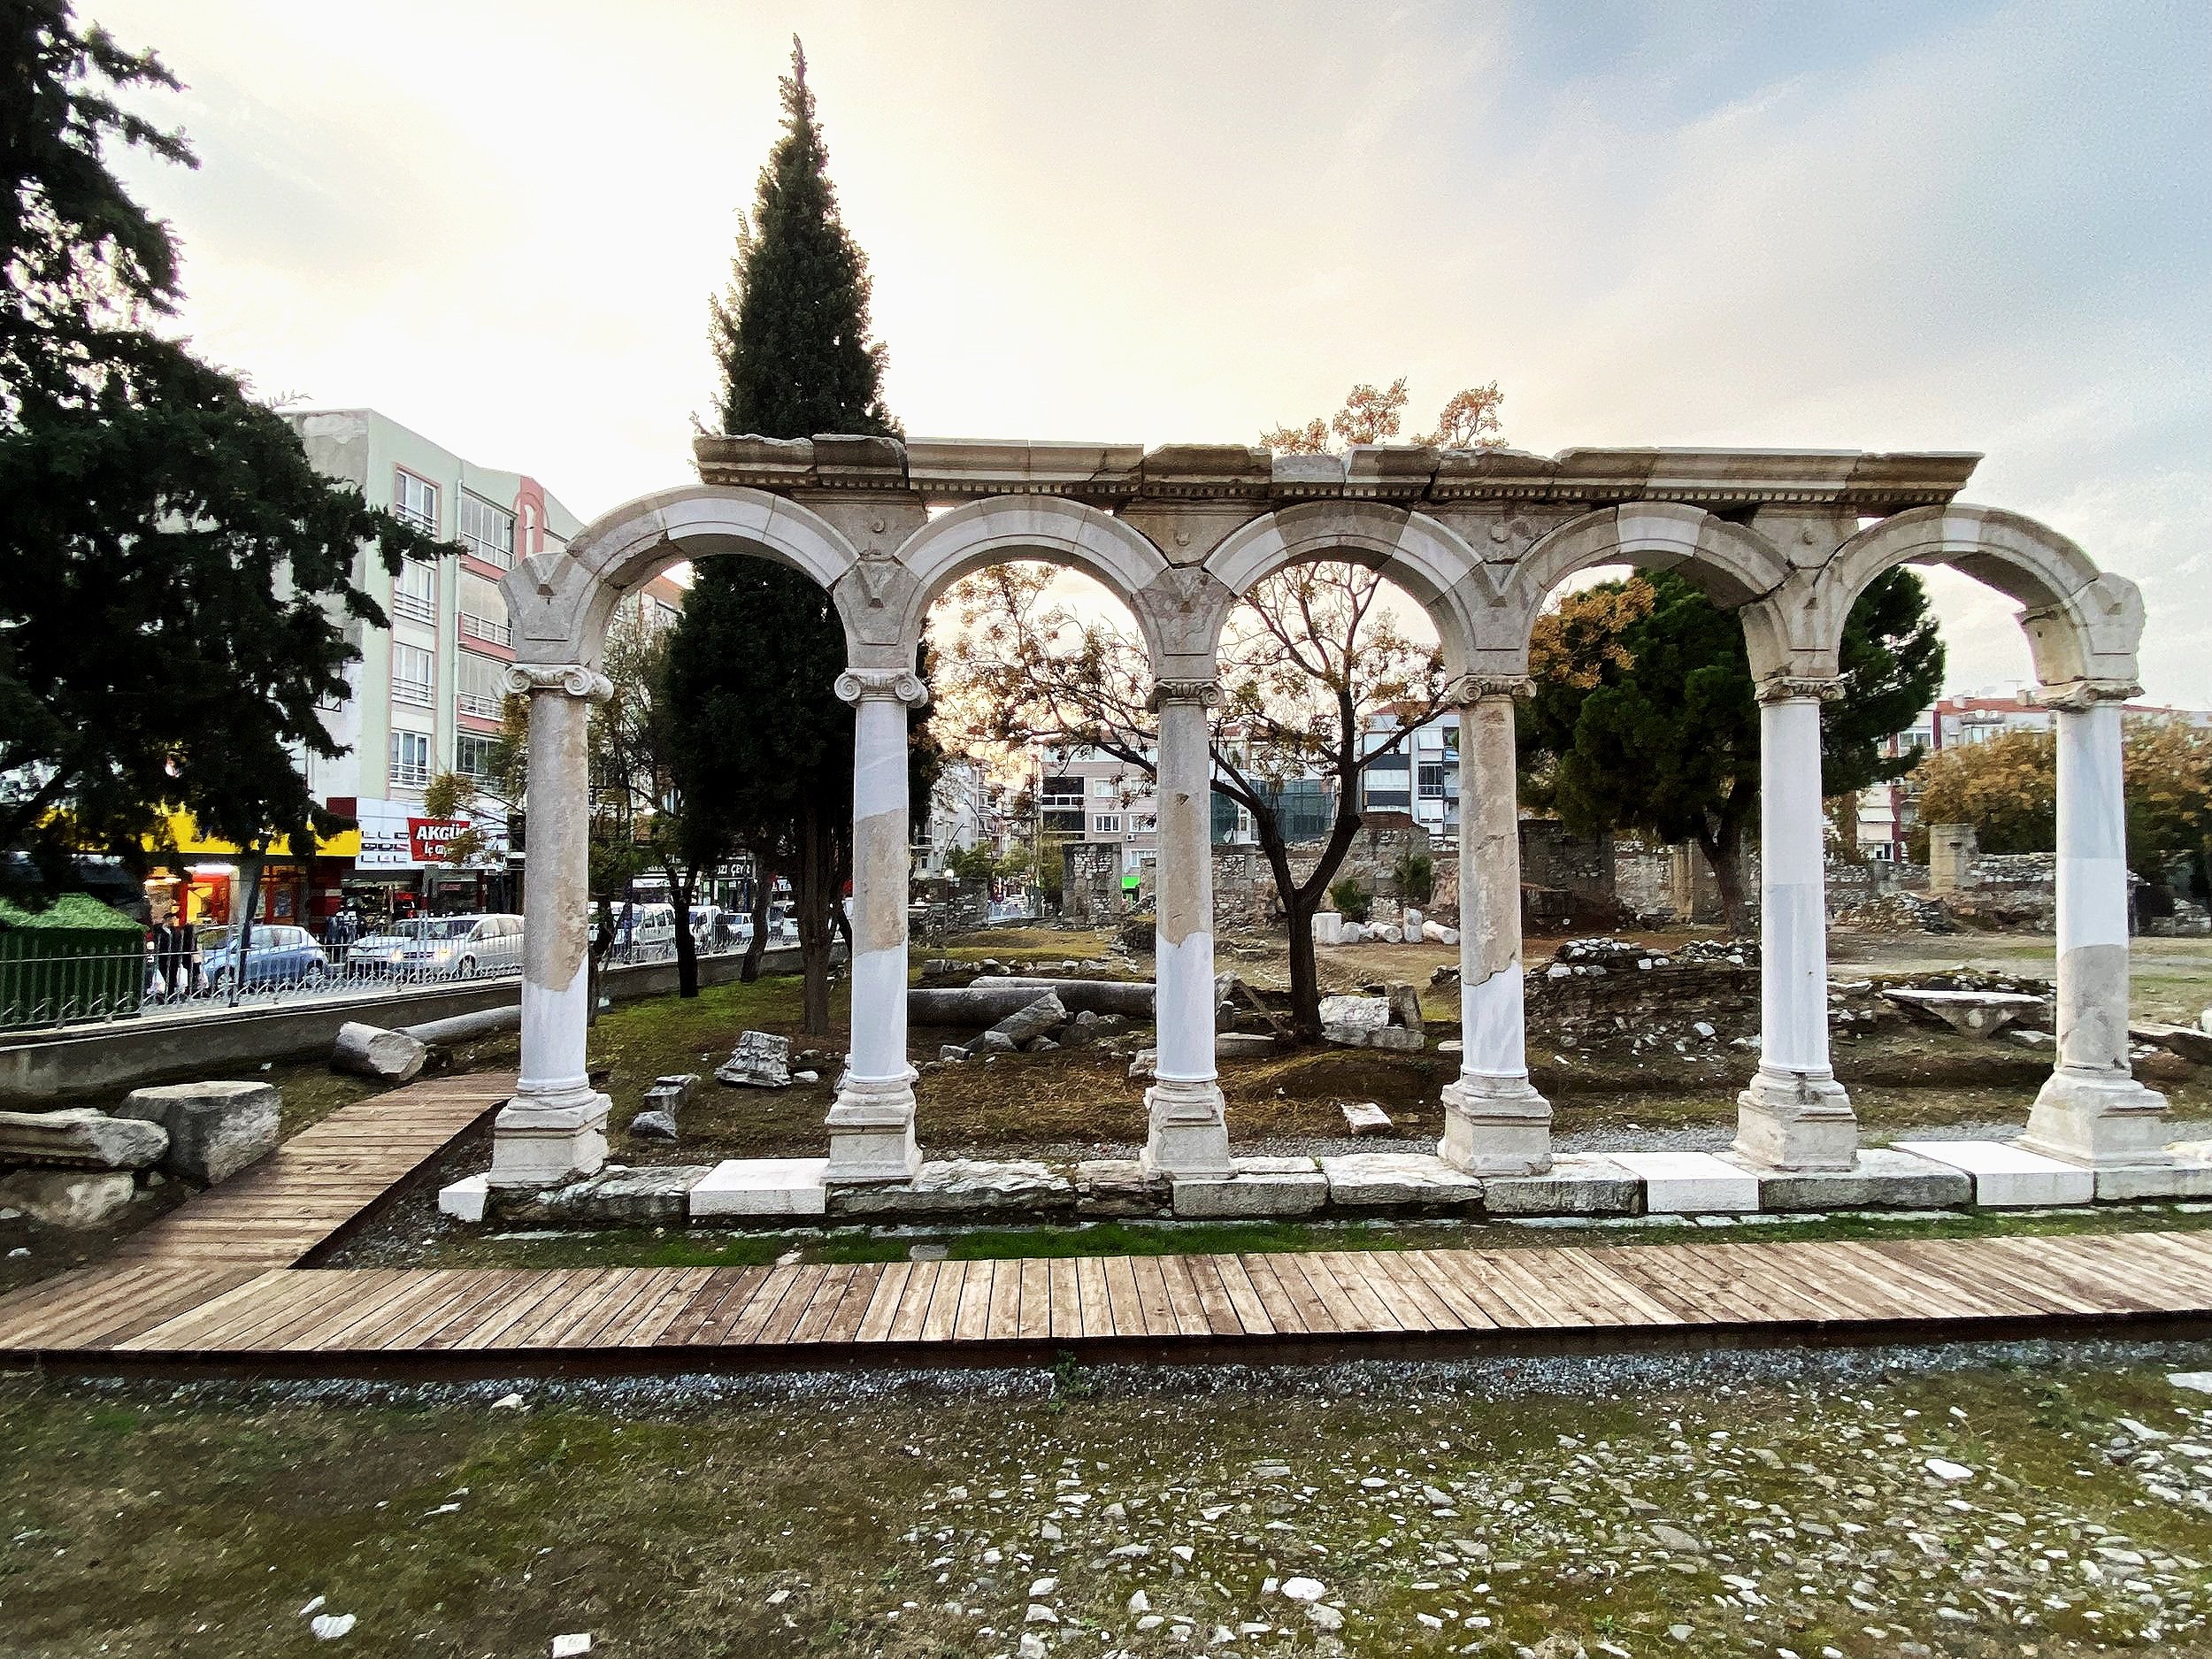 Just a few ruins from ancient Thyatira are visible in the modern city of Akhisar.